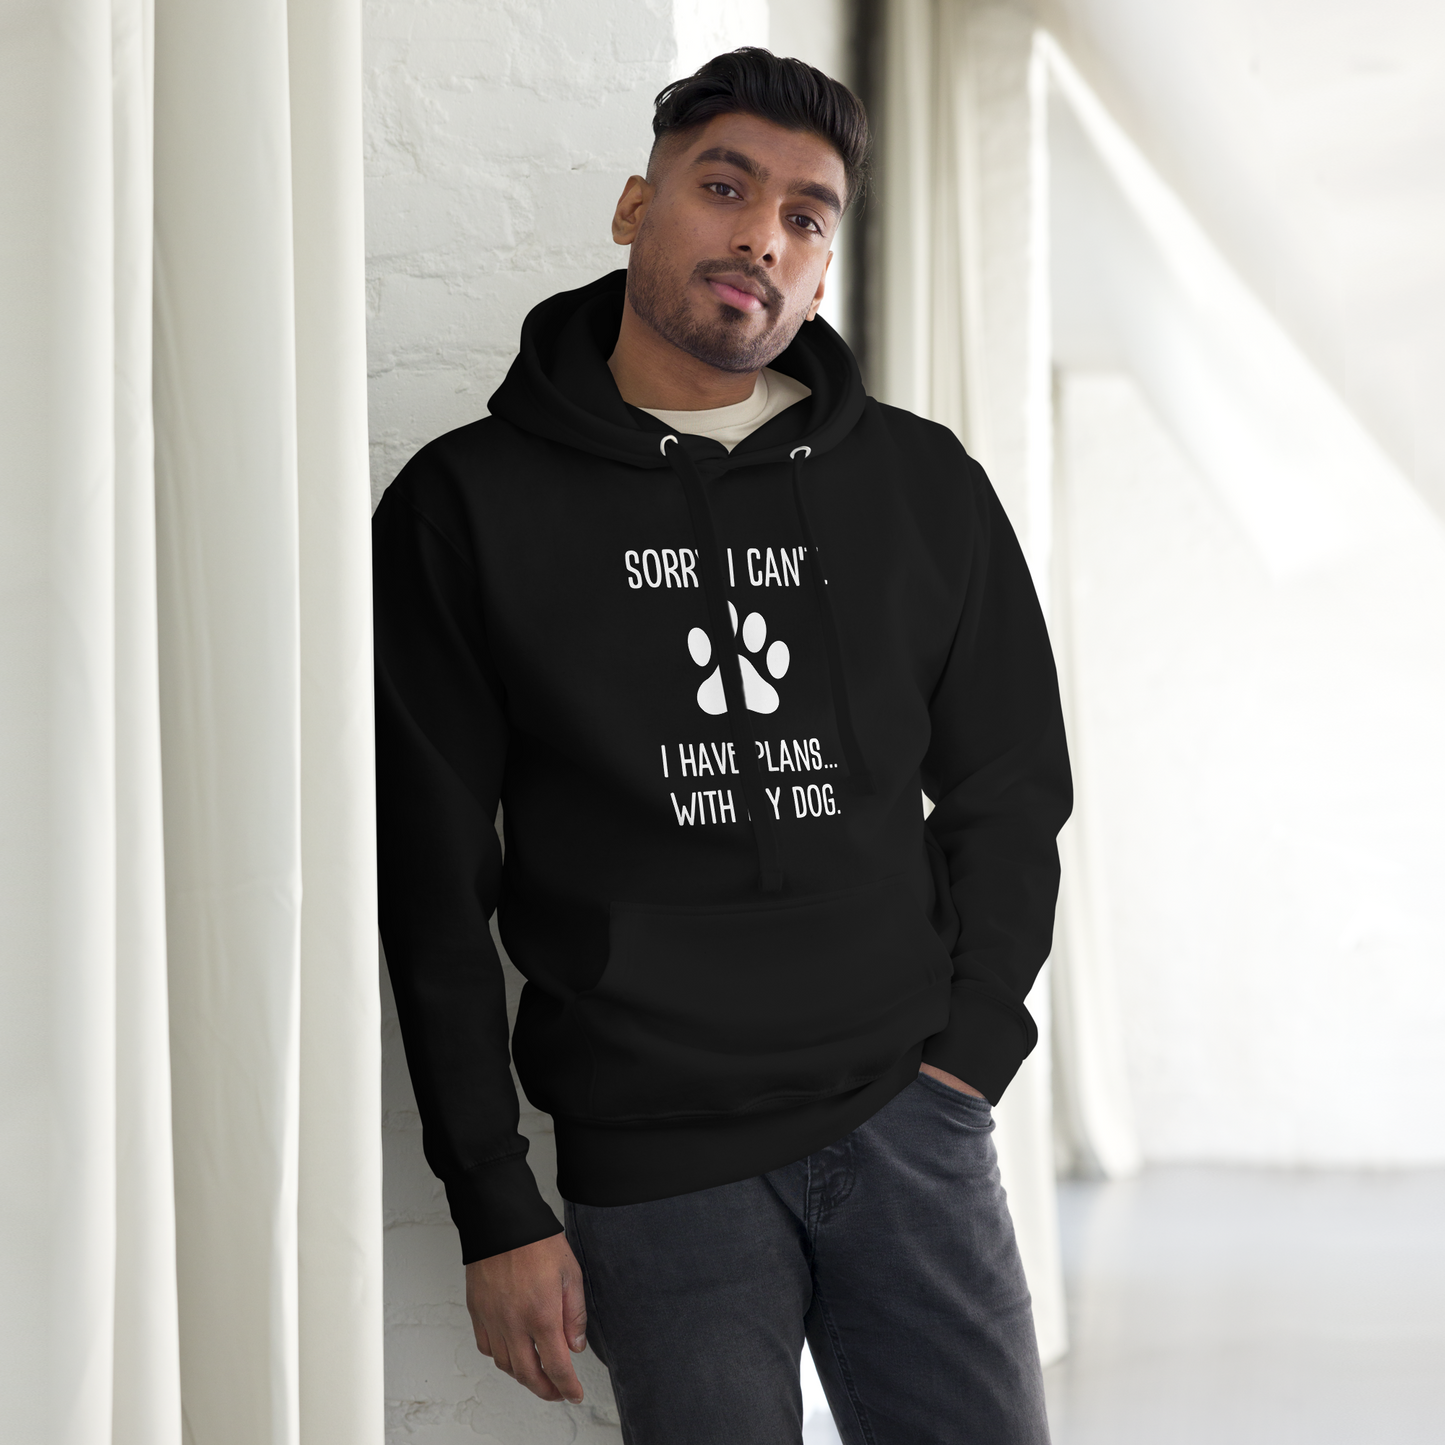 Dog Lovers Unisex Hoodie - Sorry I Can't. I Have Plans...With My Dog